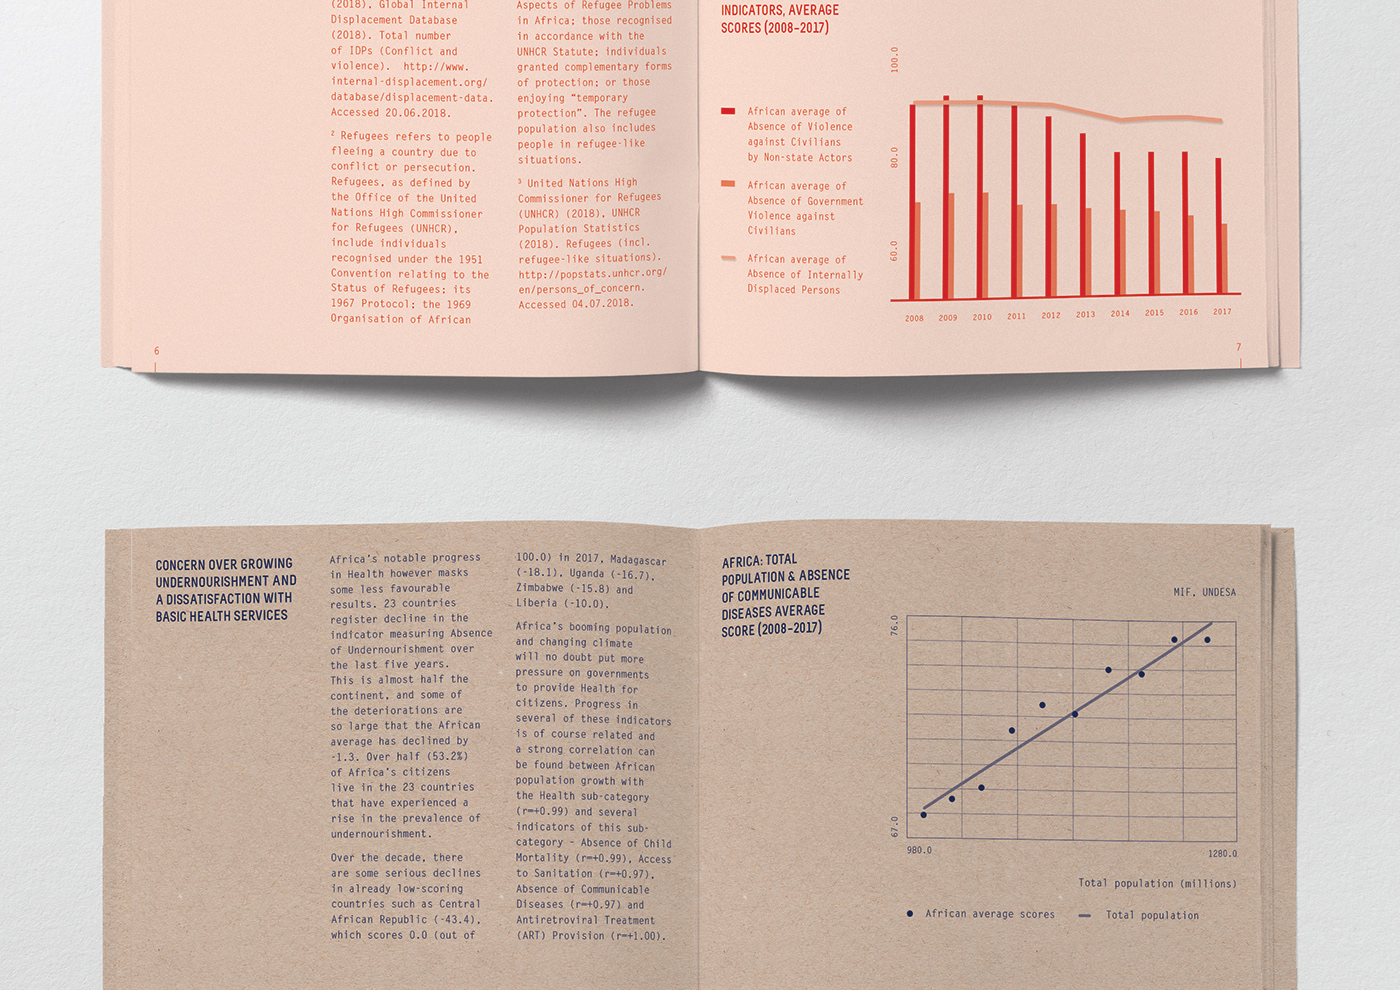 print information design index Layout editorial branding  visual identity typography   font